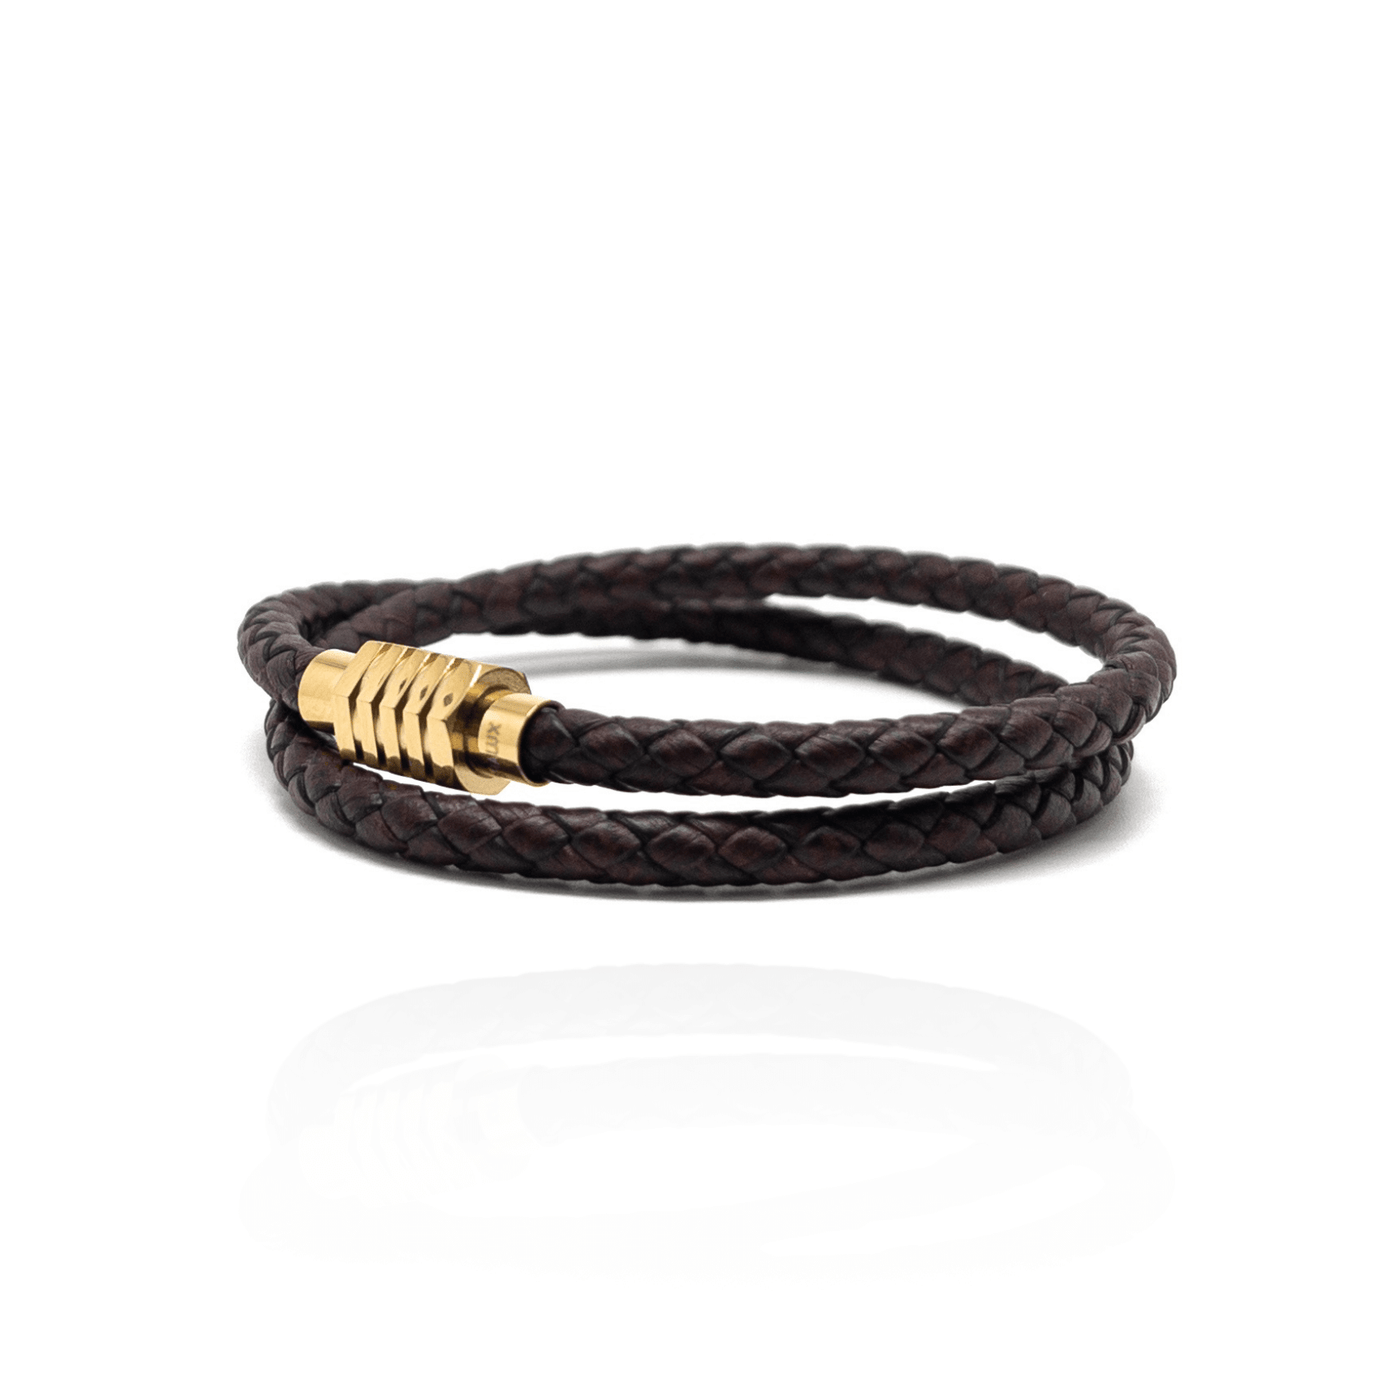 The Dark Brown Duo and Gold Plated Buckle Leather bracelet